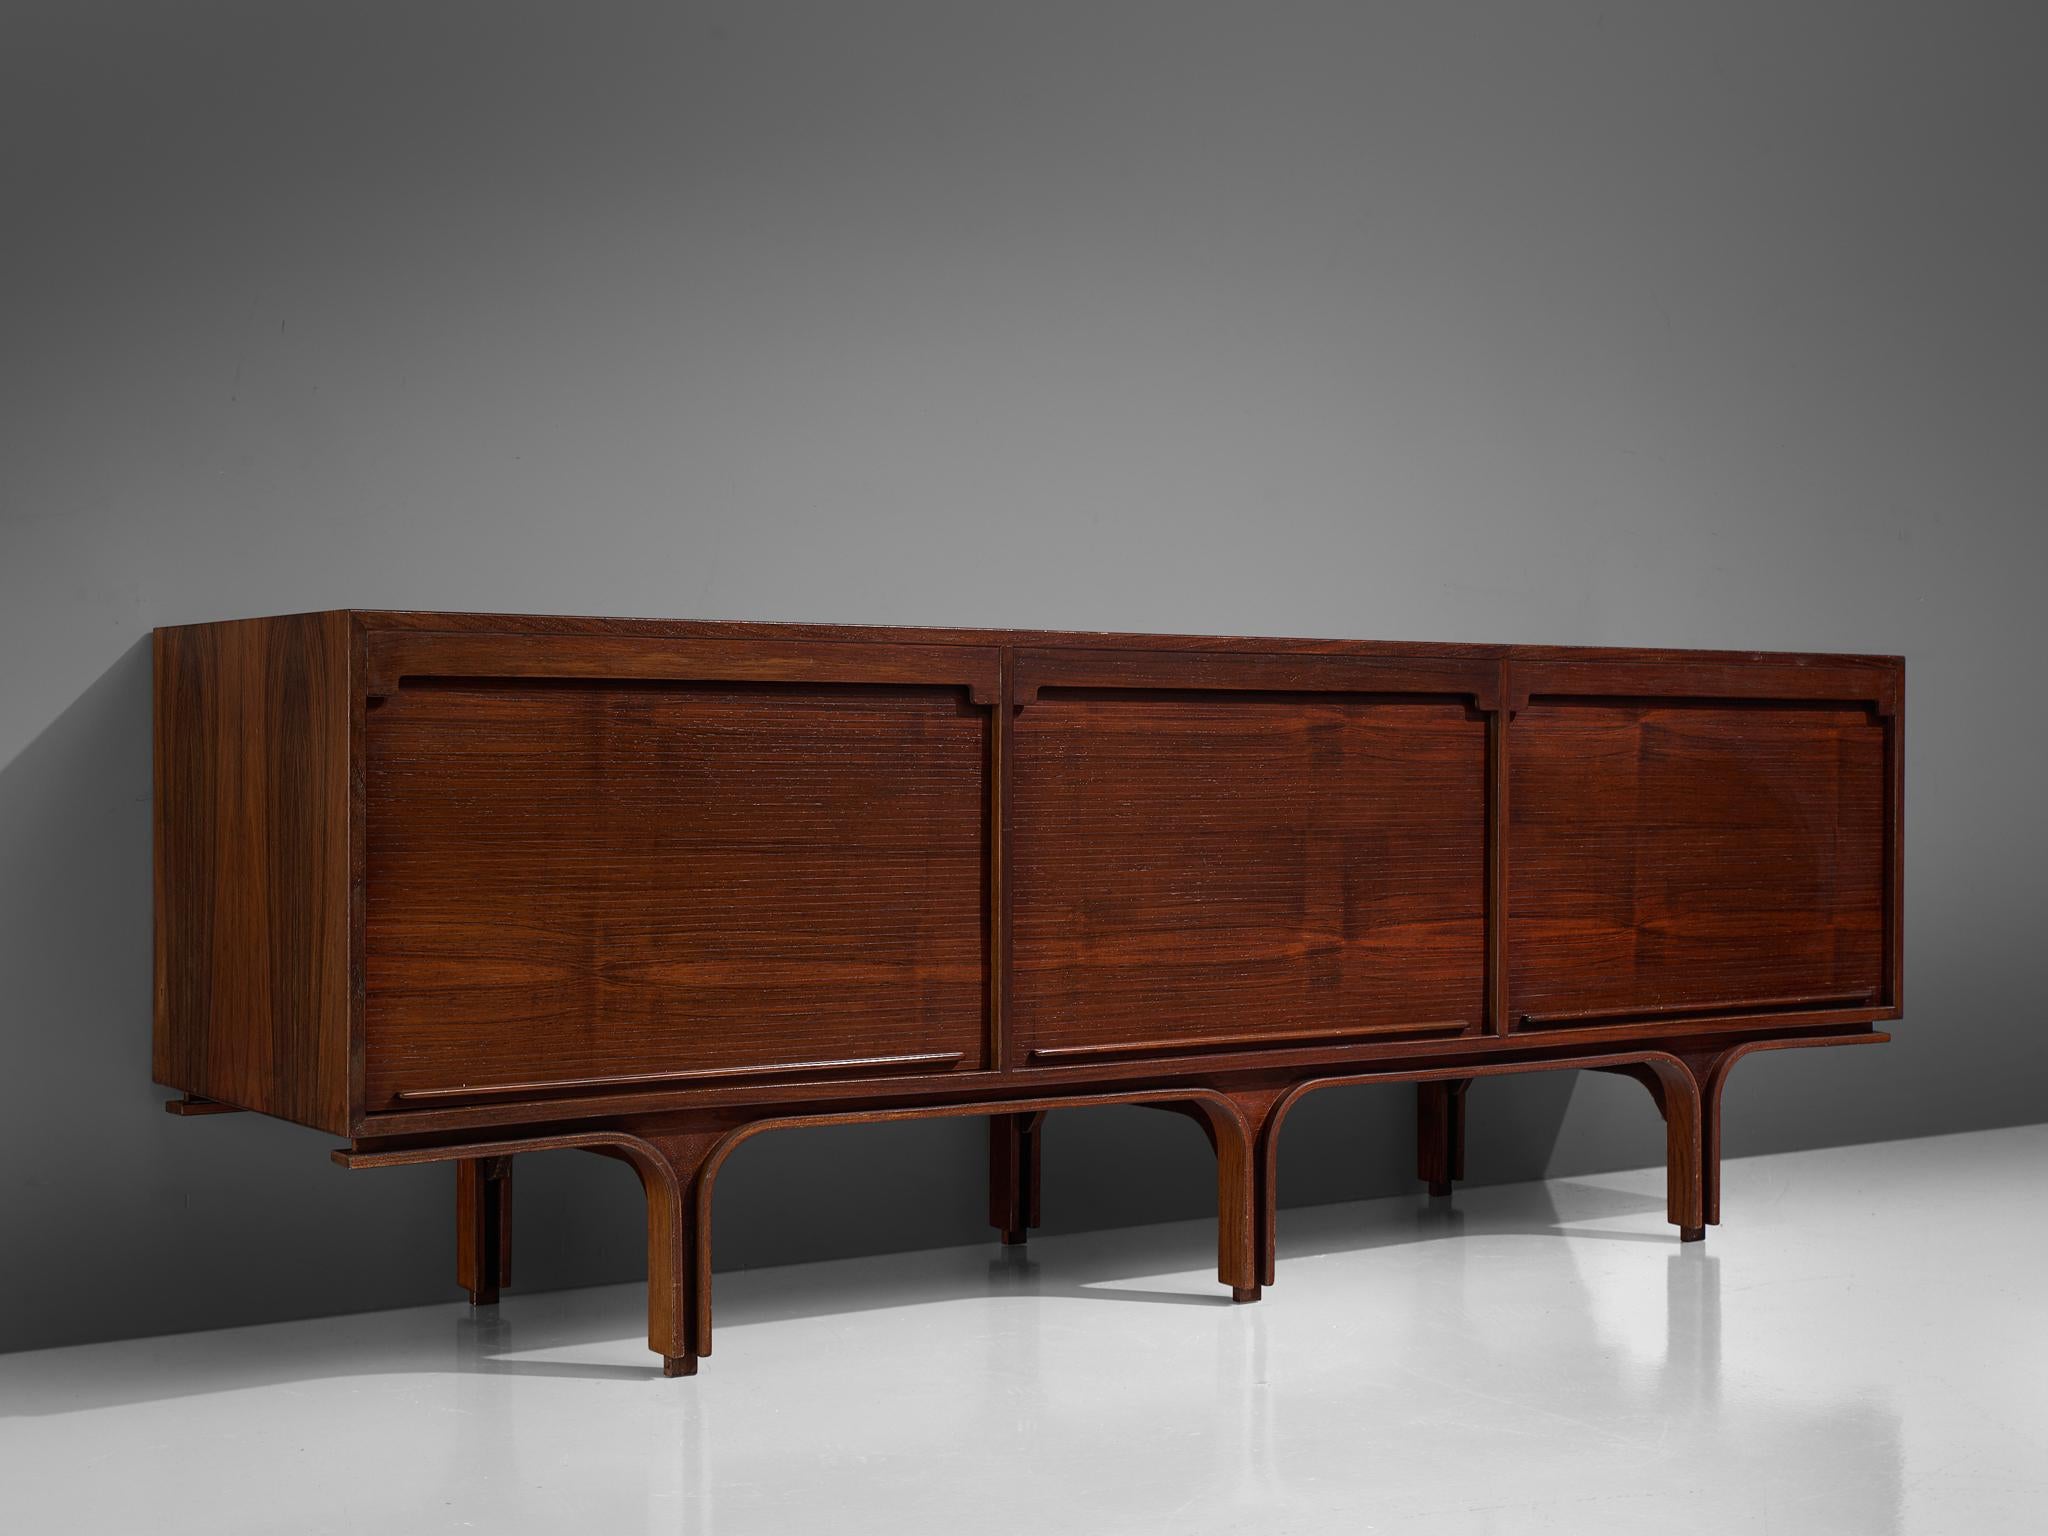 Gianfranco Frattini for Bernini, credenza, rosewood, Italy, 1960s.

This credenza in rosewood is designed by Frattini. It features the typical design traits of Frattini such as the tambour doors but also the legs that feature a border with